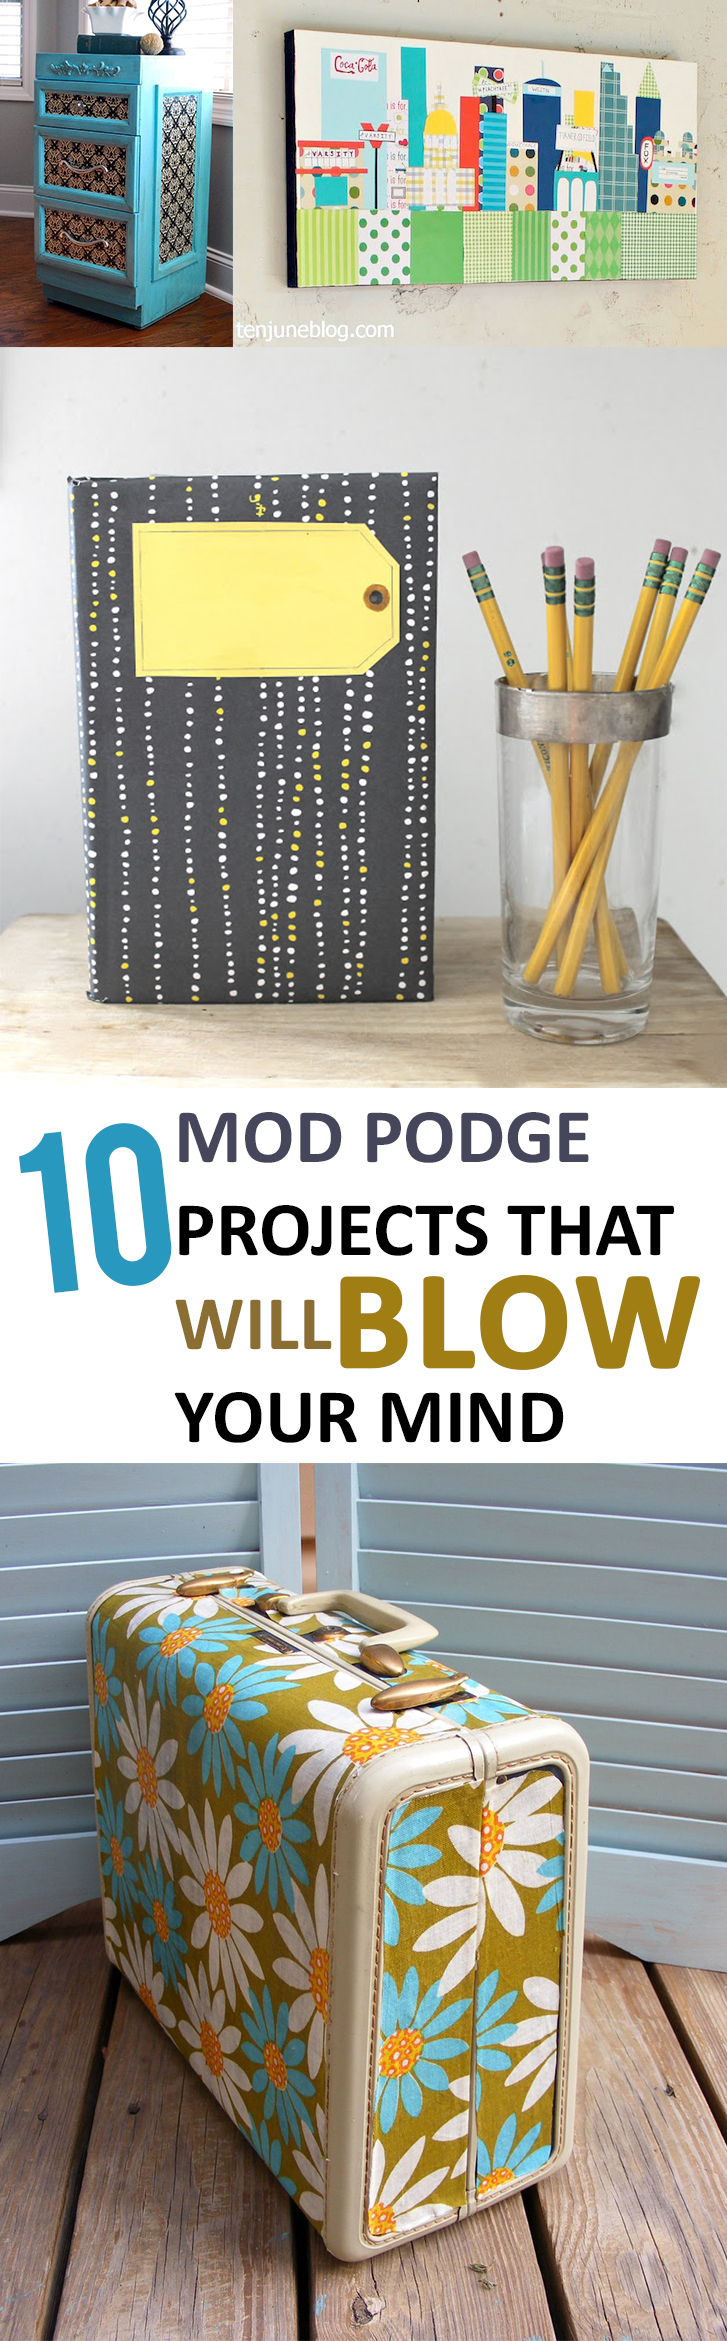 10-mod-podge-projects-that-will-blow-your-mind-sunlit-spaces-diy